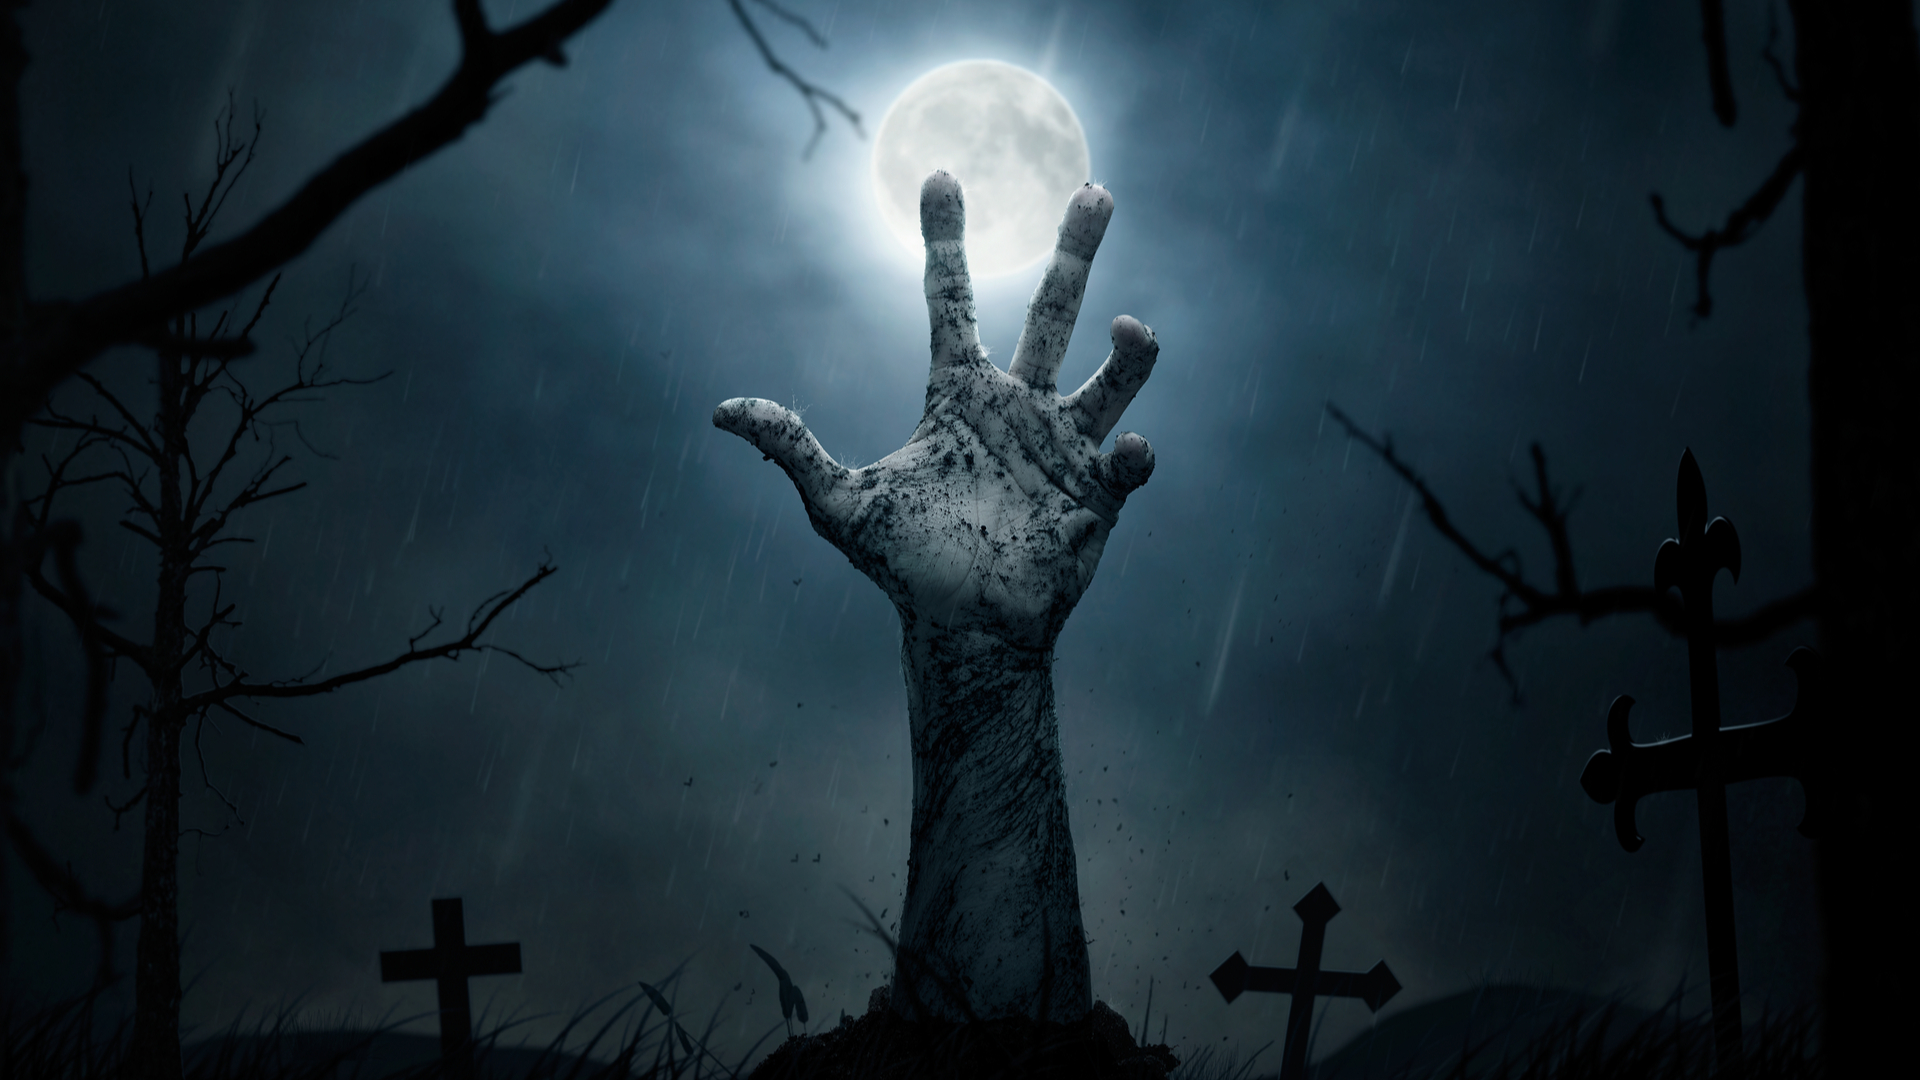 Zombie hand revived from cemetary